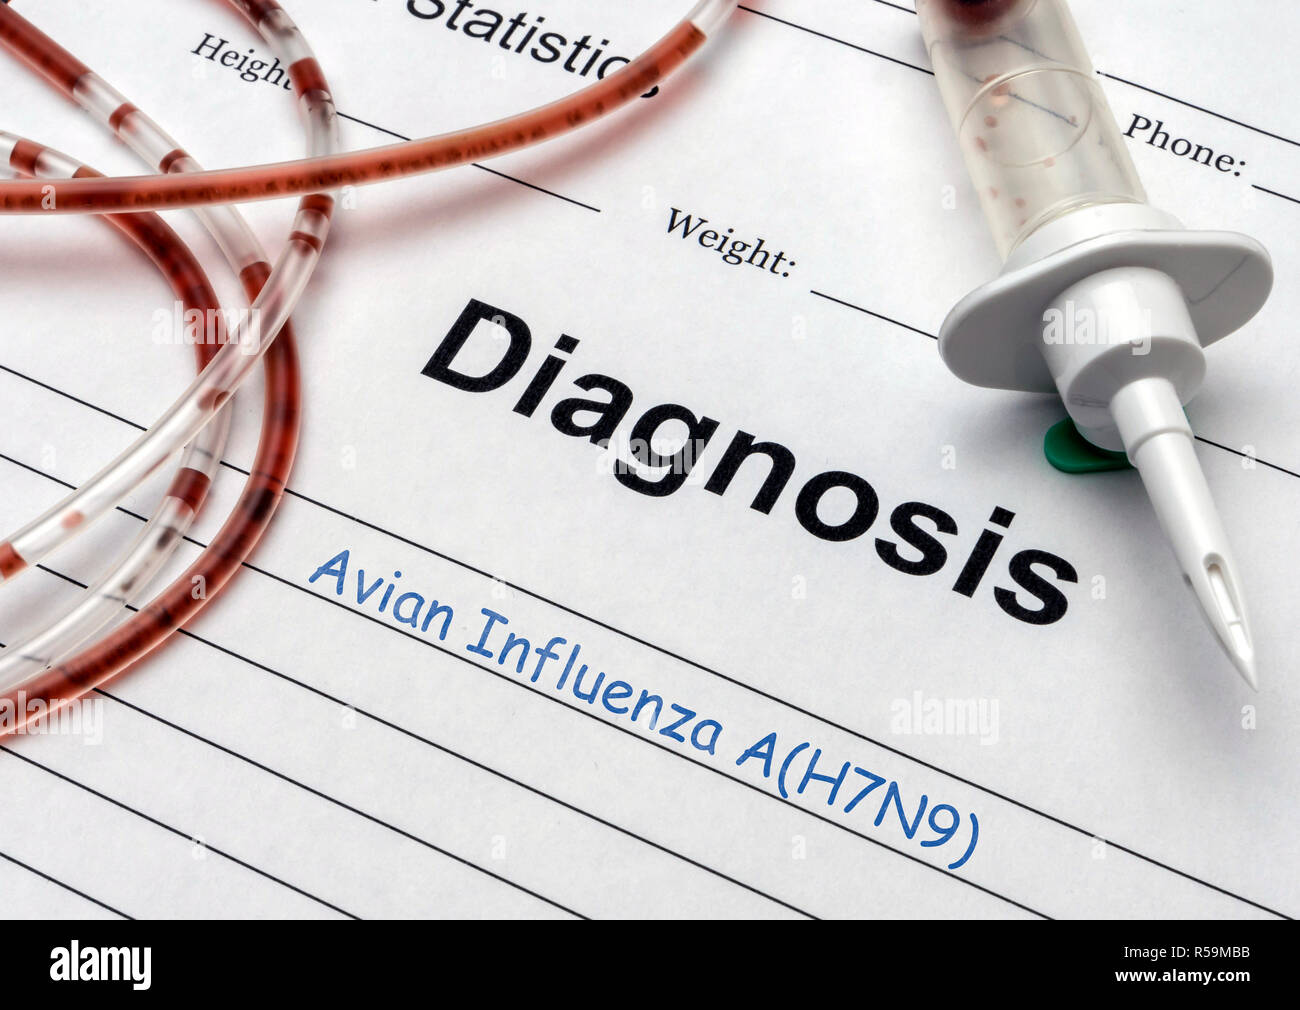 Diagnosis in a hospital of Epidemiology of Human infections with avian influenza A(H7N9), conceptual image Stock Photo